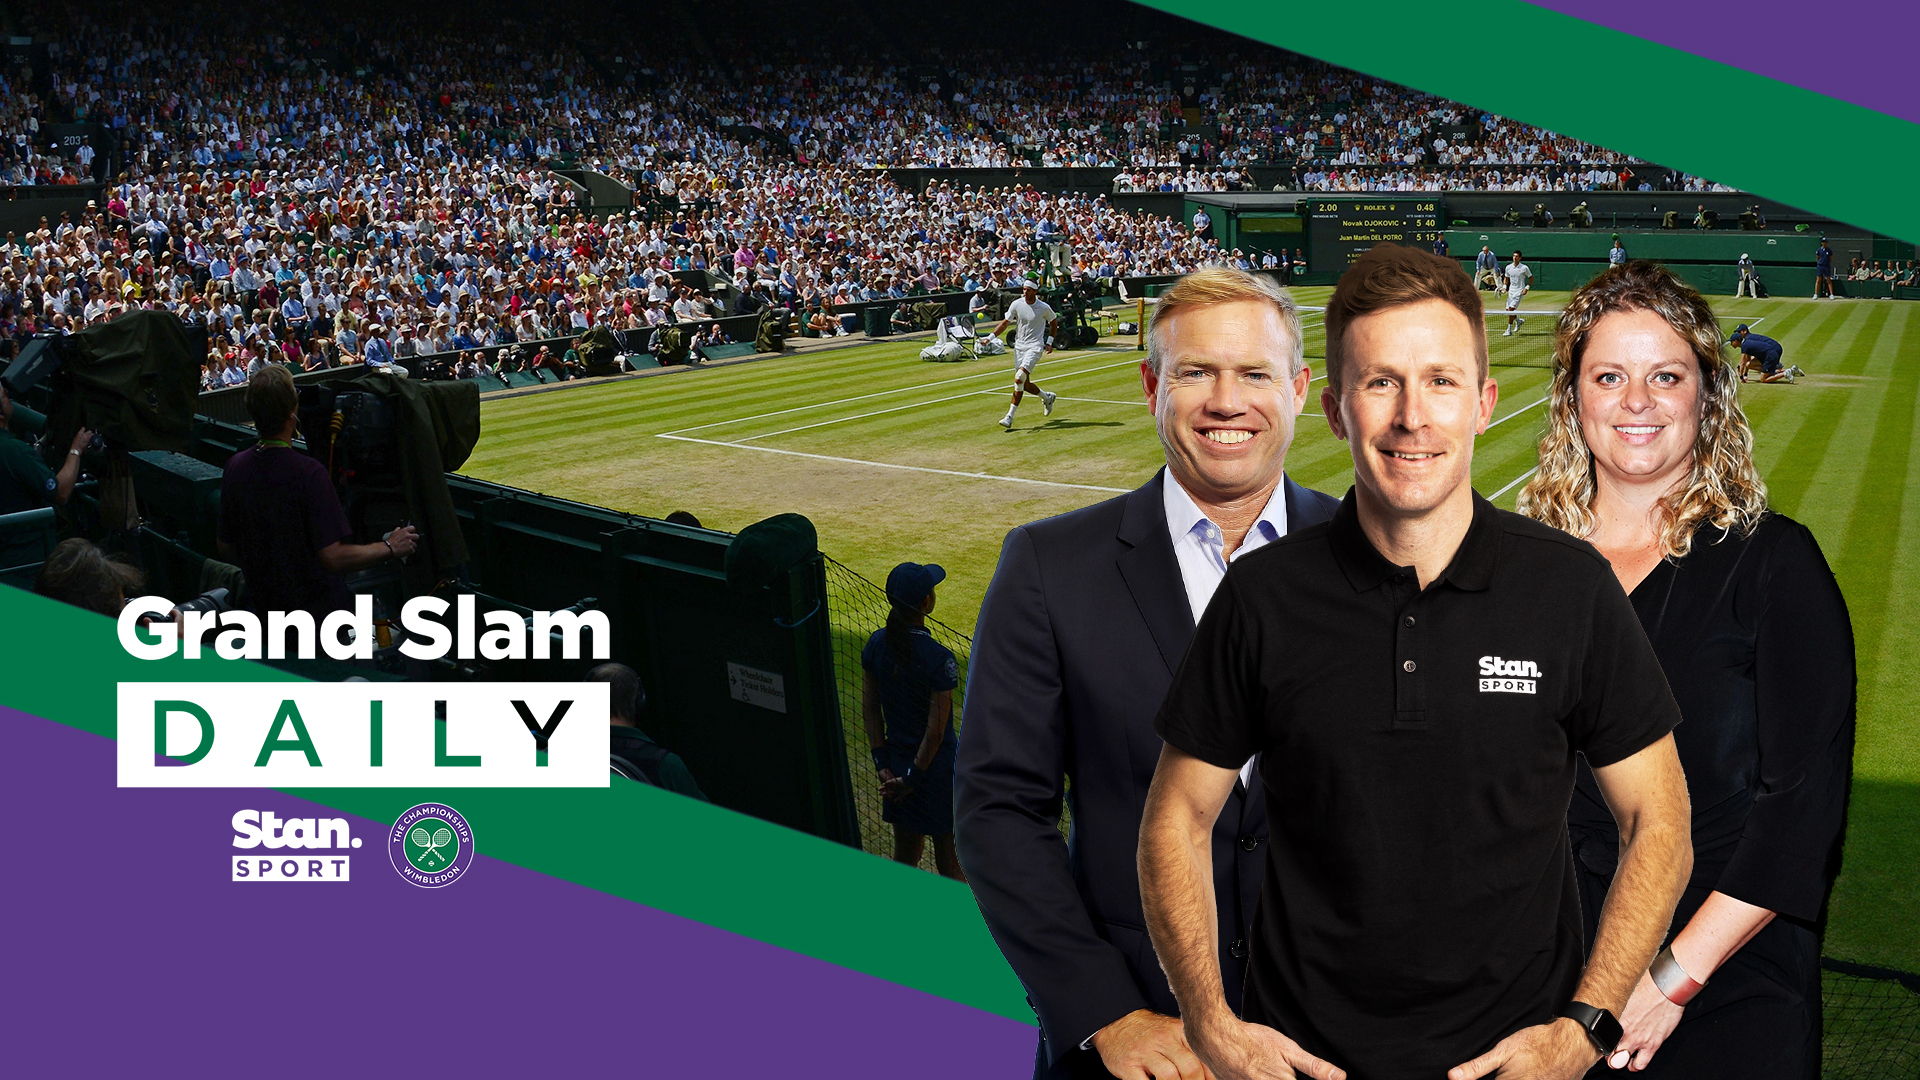 Grand Slam Daily with Chris Stubbs, Kim Clijsters and Mark Petchey